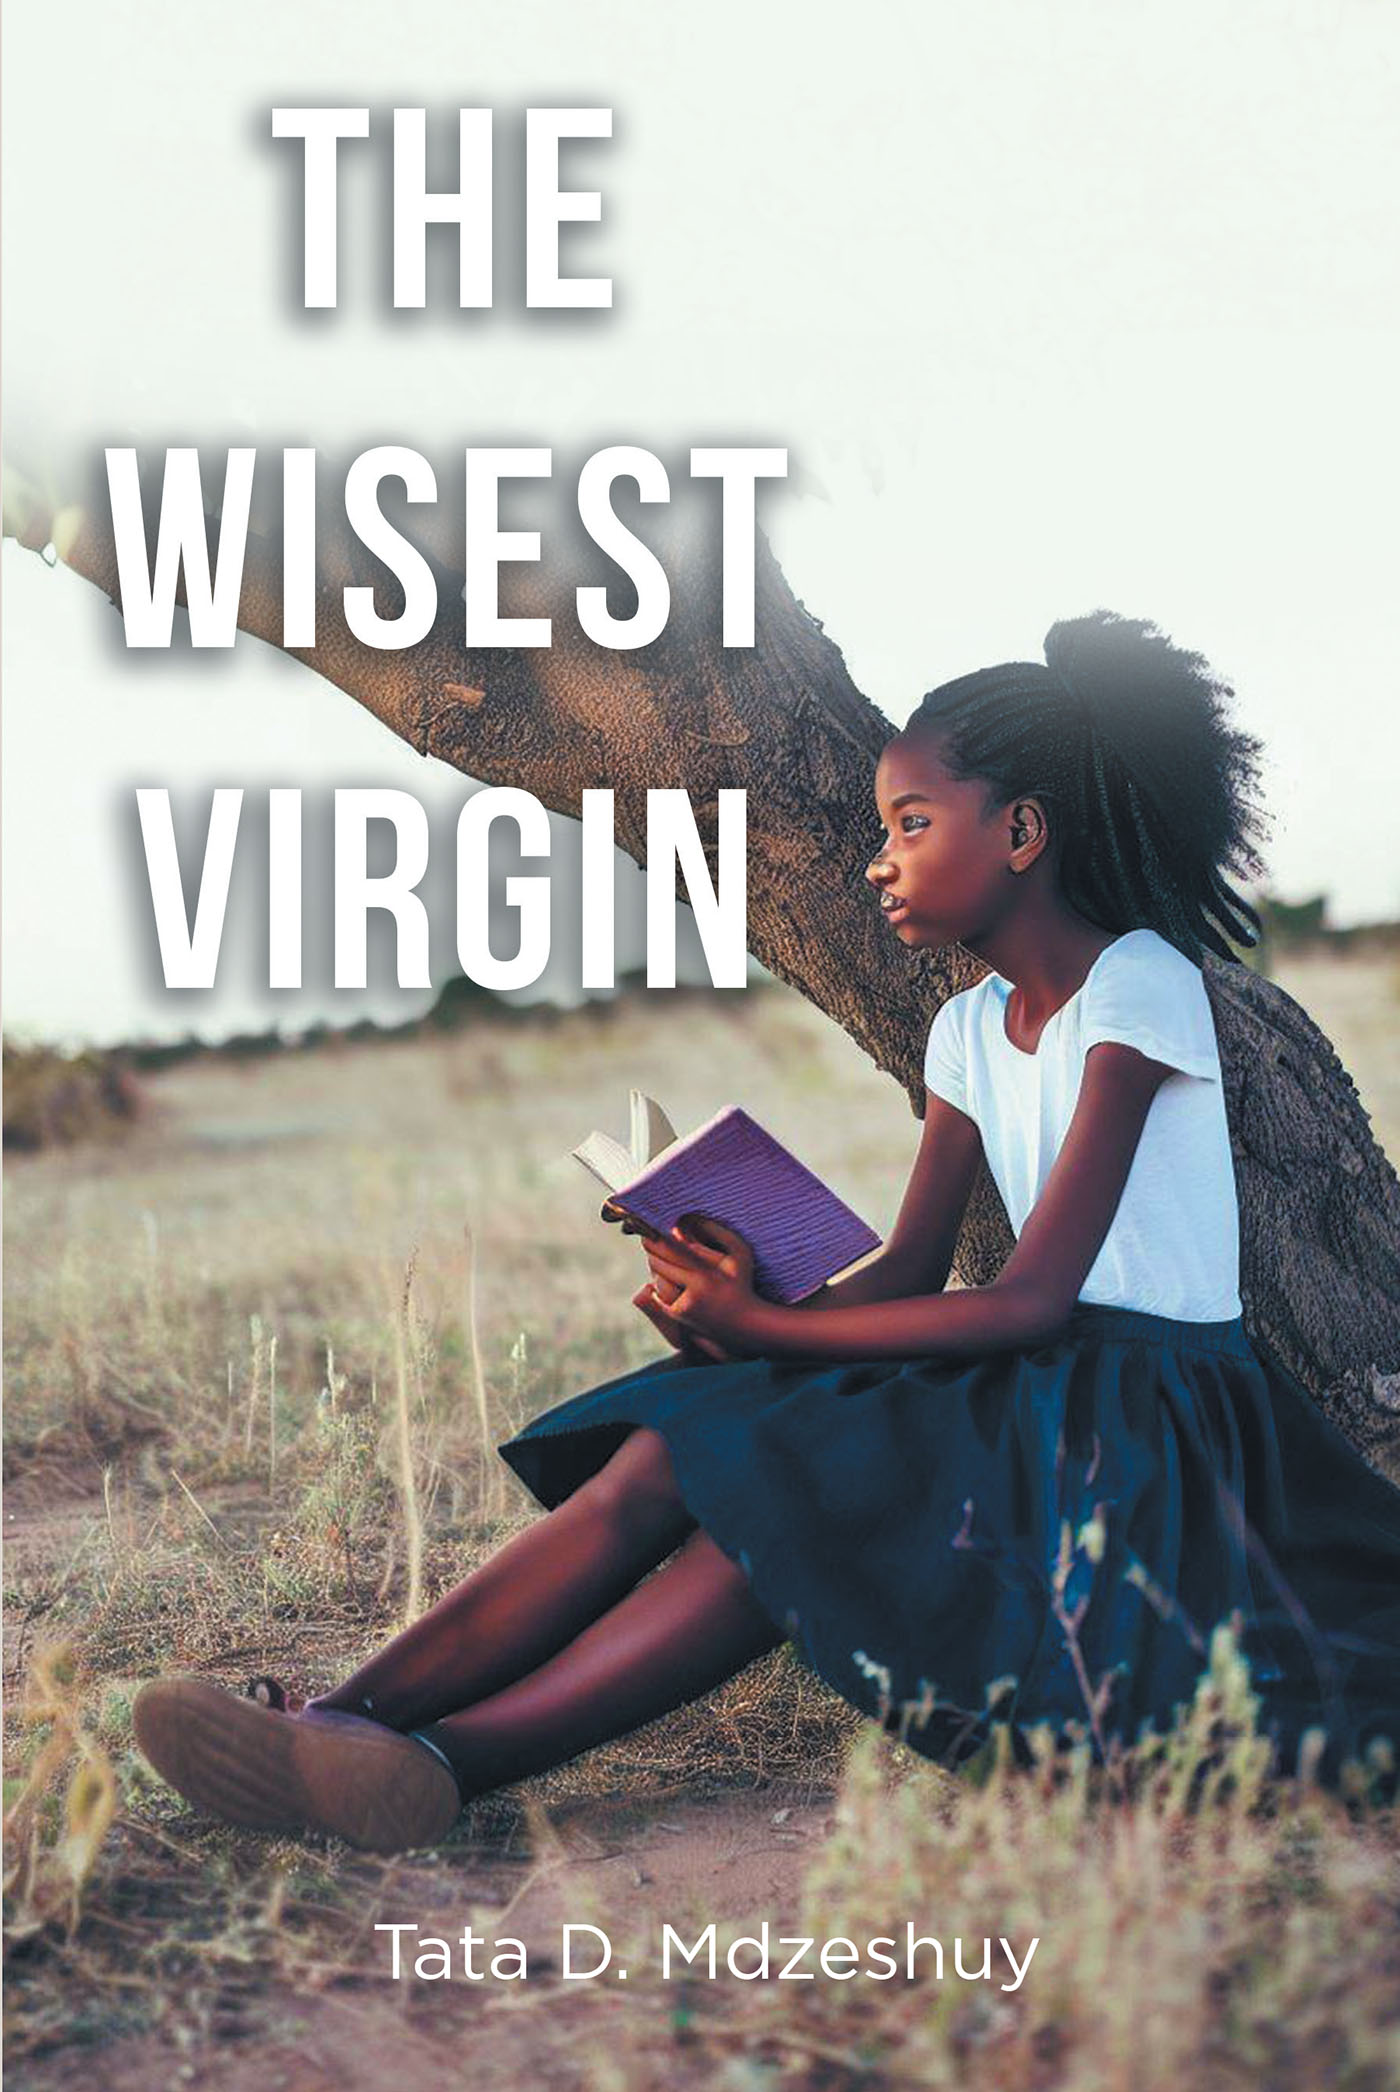 Author Tata D. Mdzeshuy’s New Book, "The Wisest Virgin," is a Story of a Woman Who is Forced to Confront Her Beliefs Towards Men